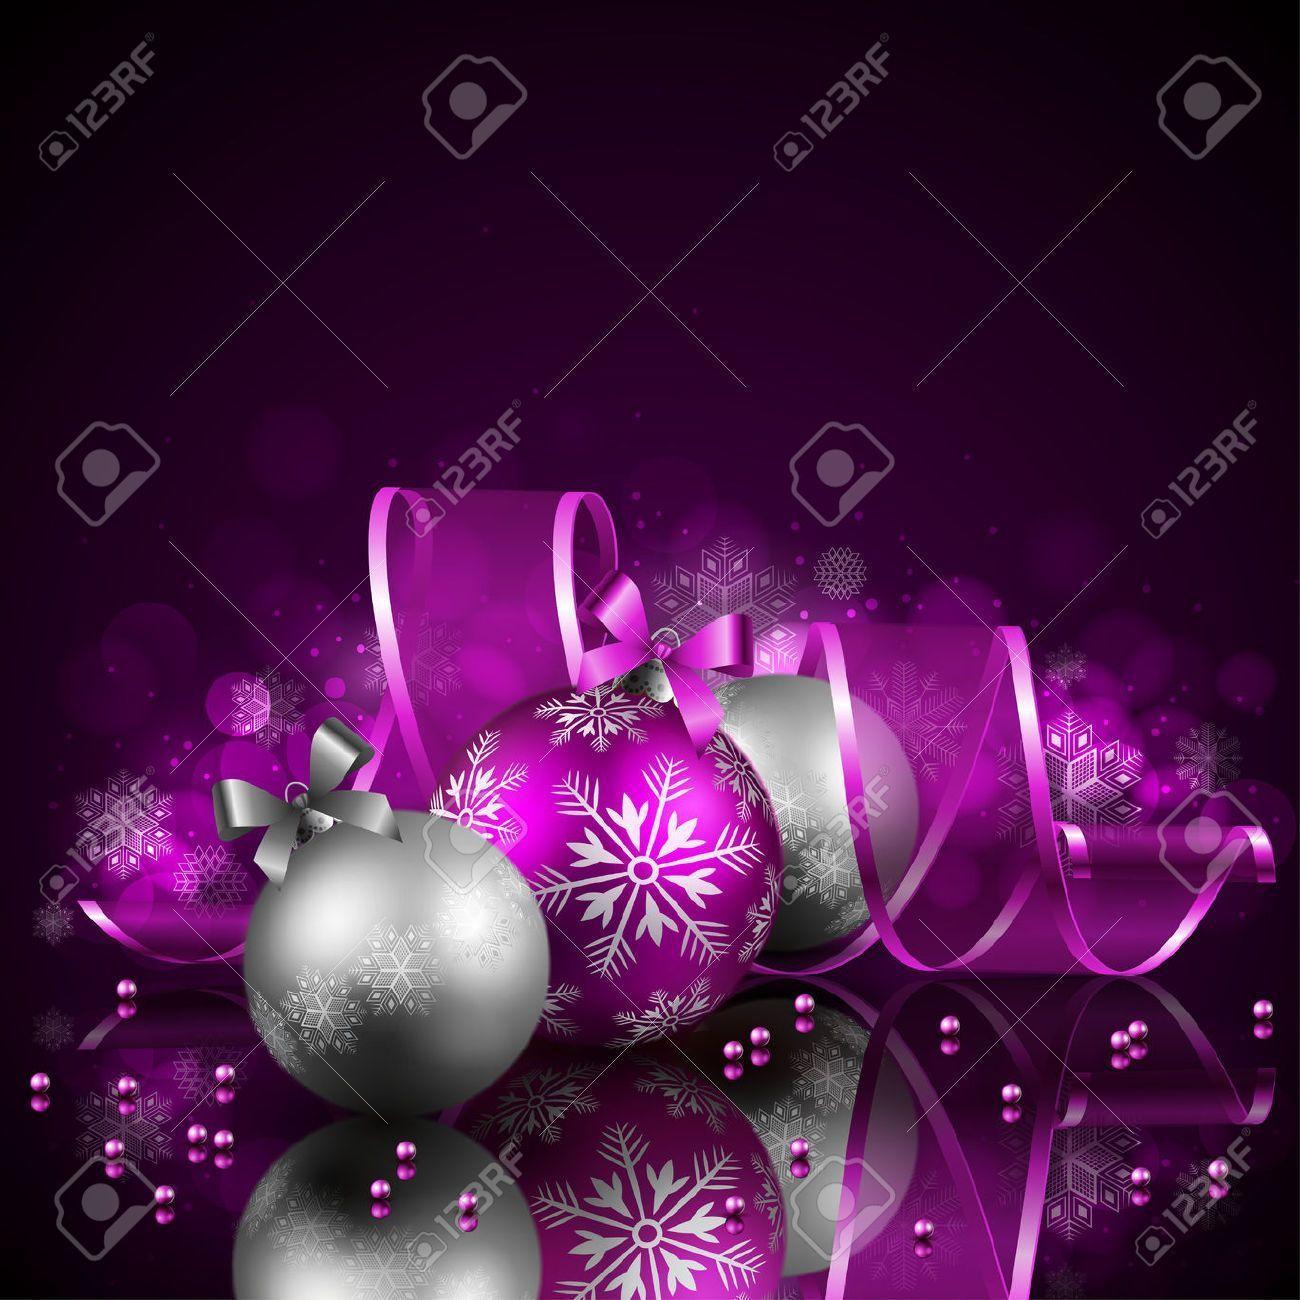 Purple Christmas Image, Stock Picture, Royalty Free Purple